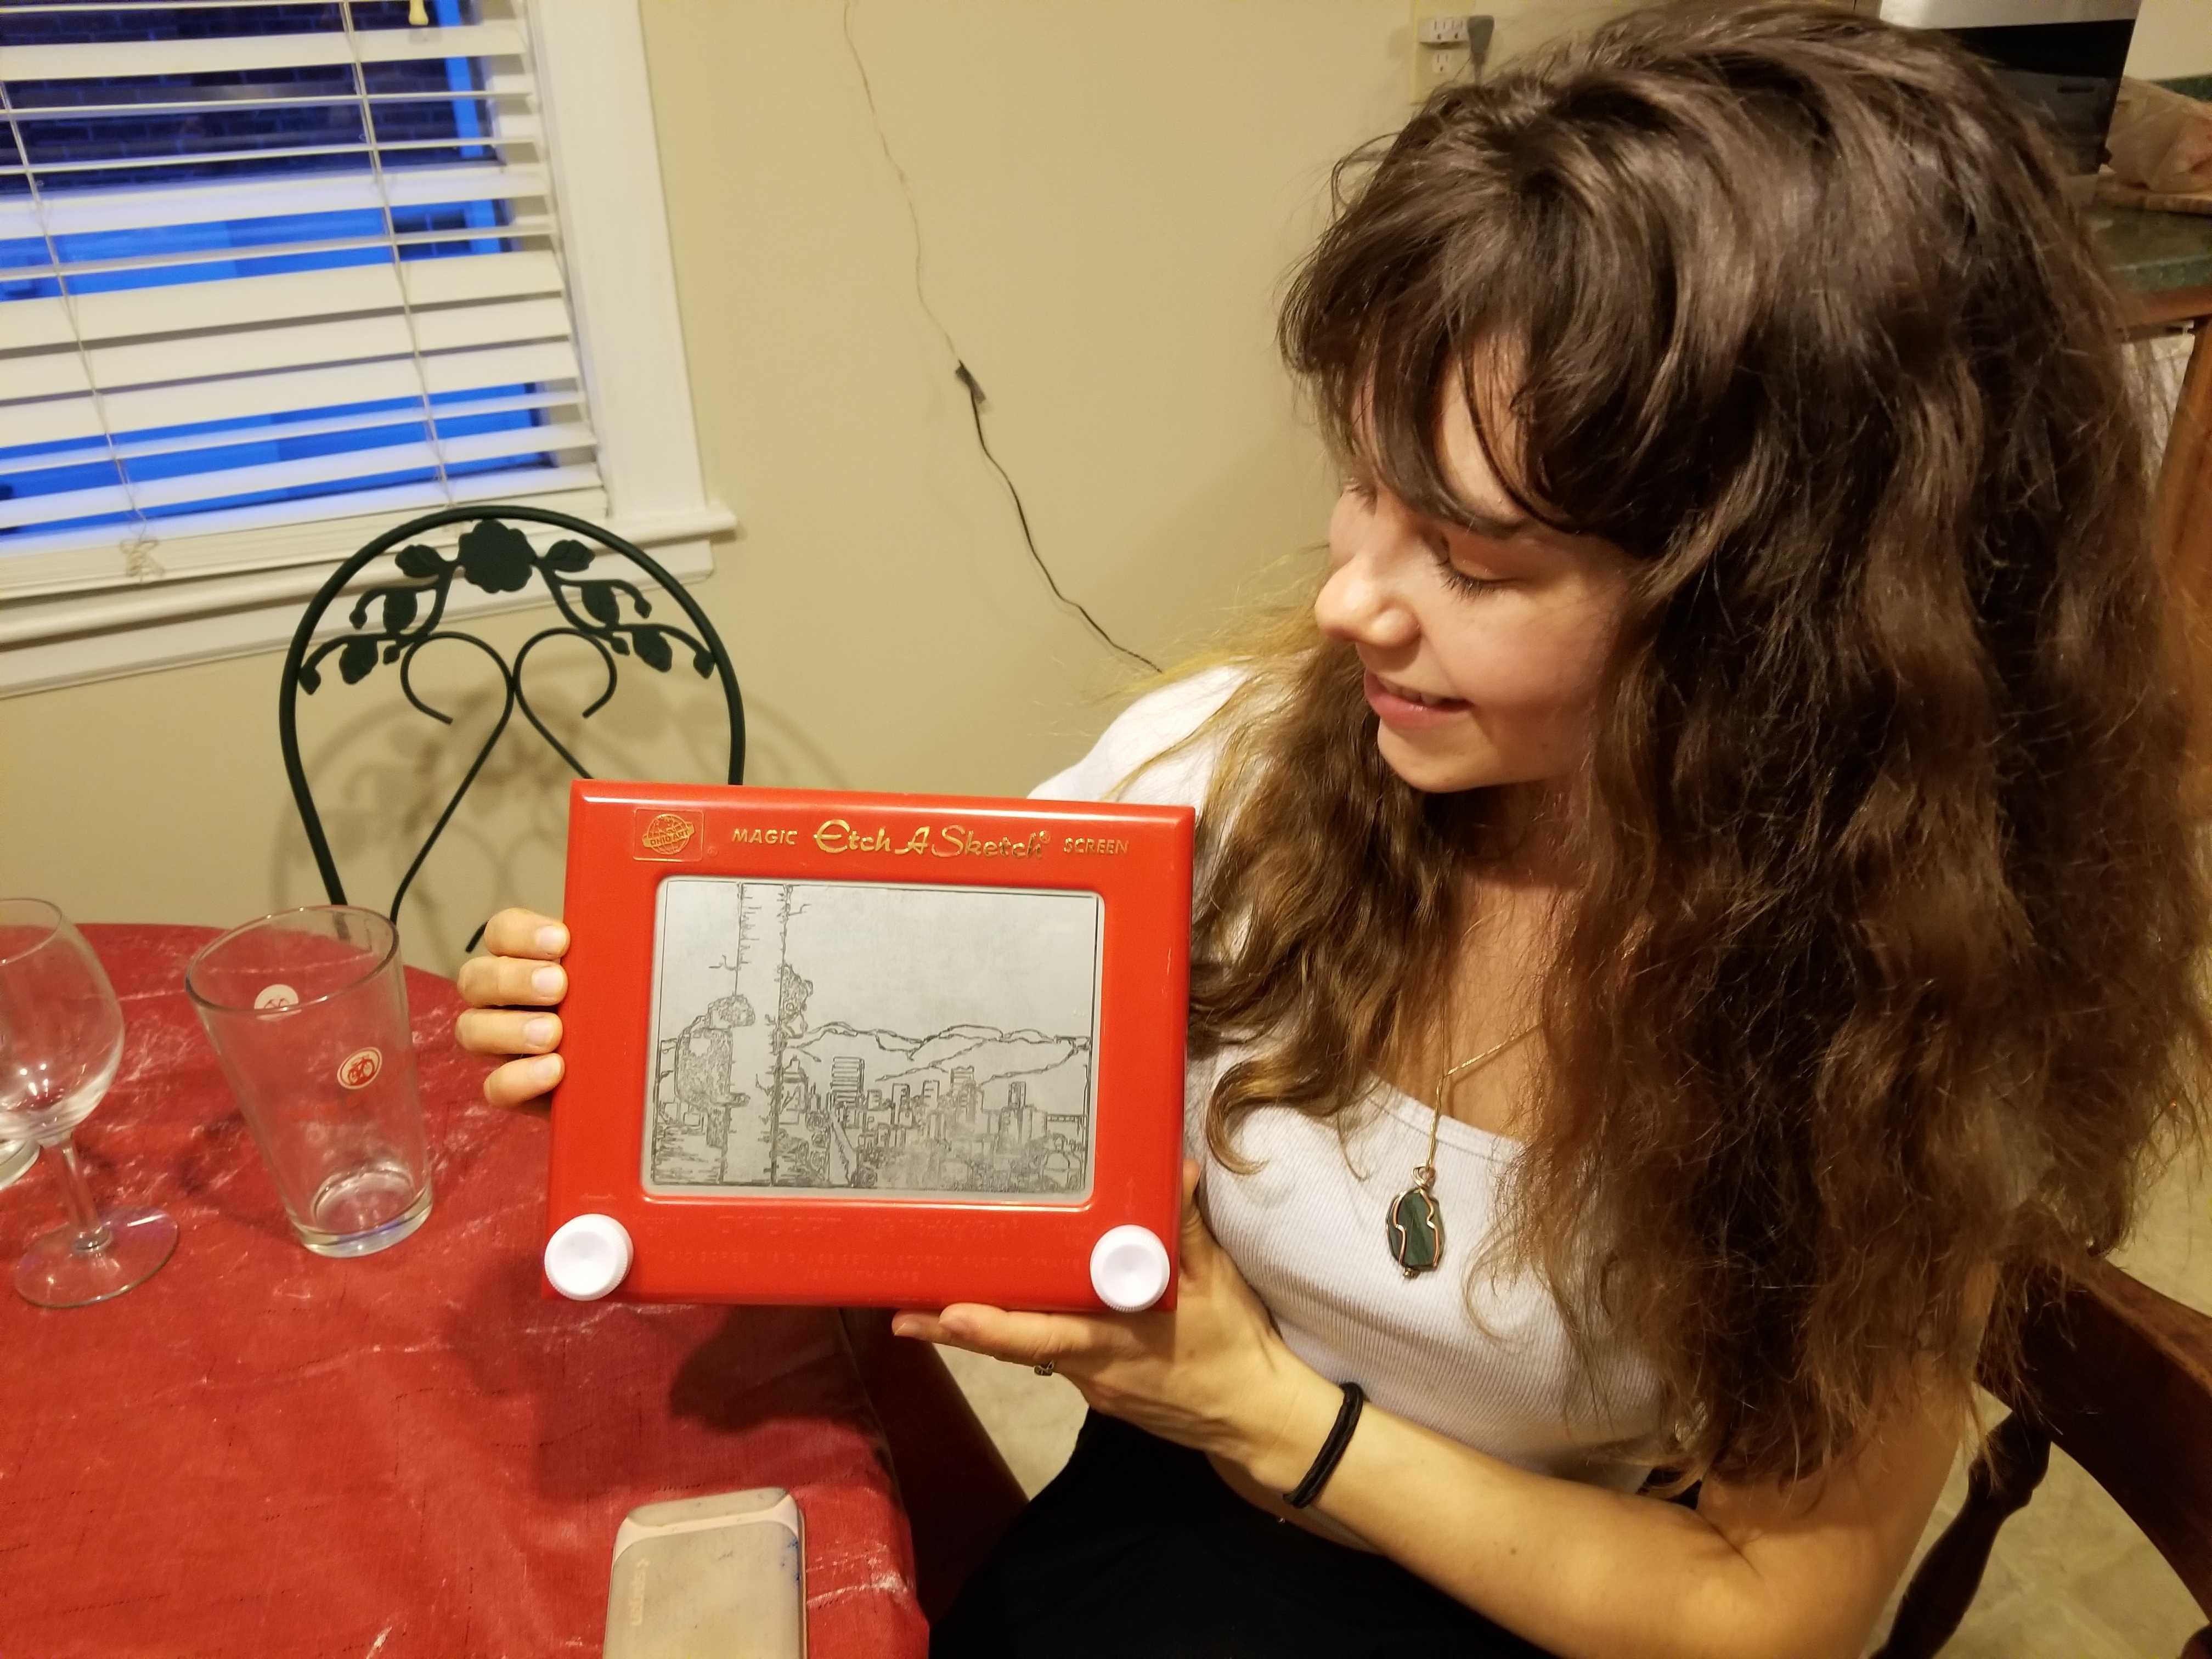 Local resident creates intricate artwork with Etch A Sketch